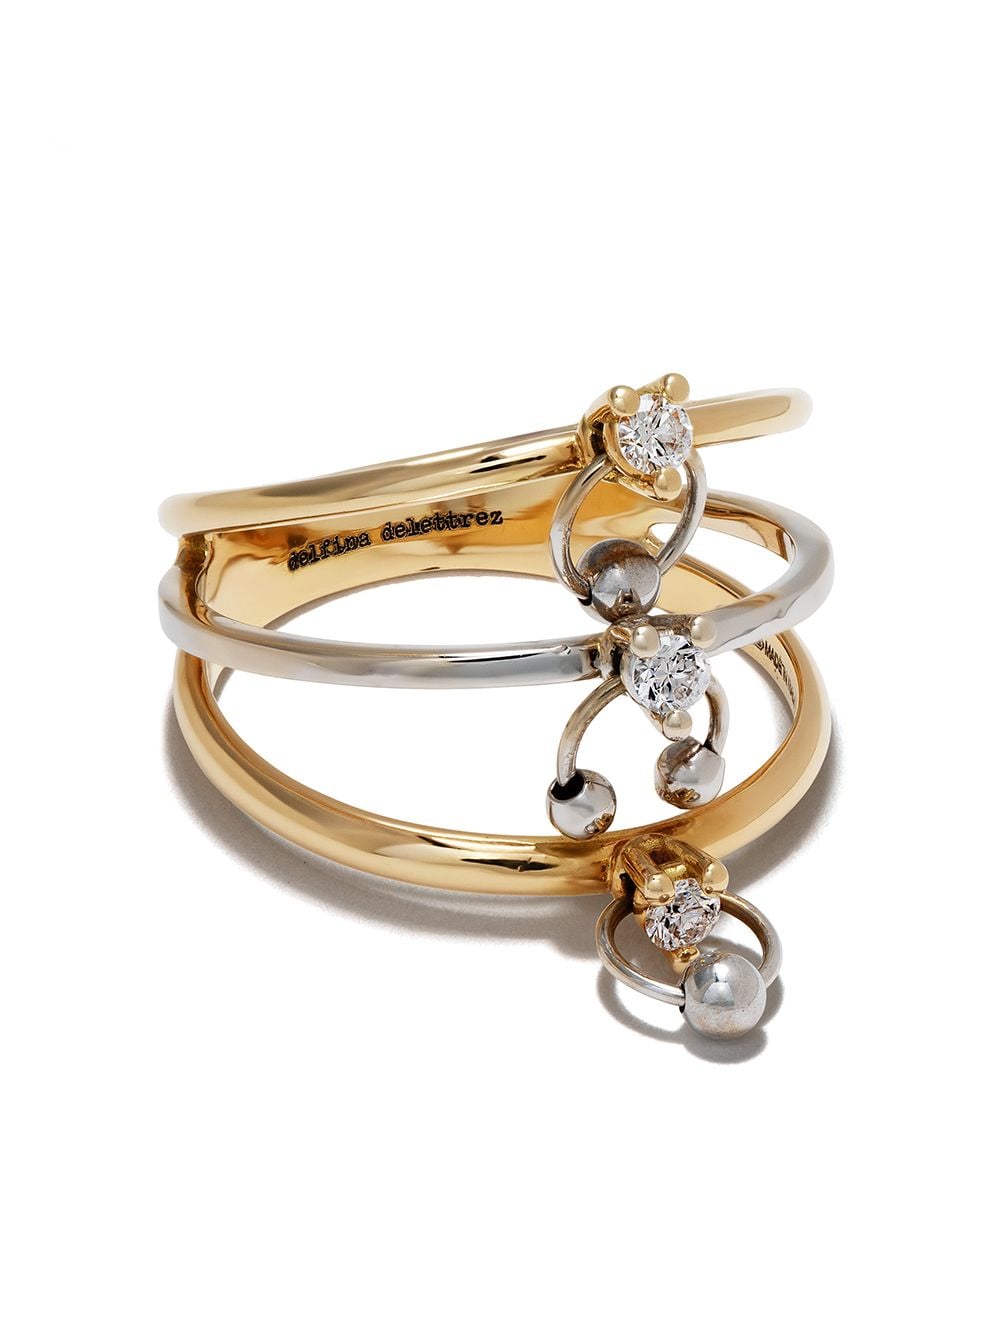 delfina delettrez 18kt yellow and white gold two-in-one diamond ring piercing triple ring